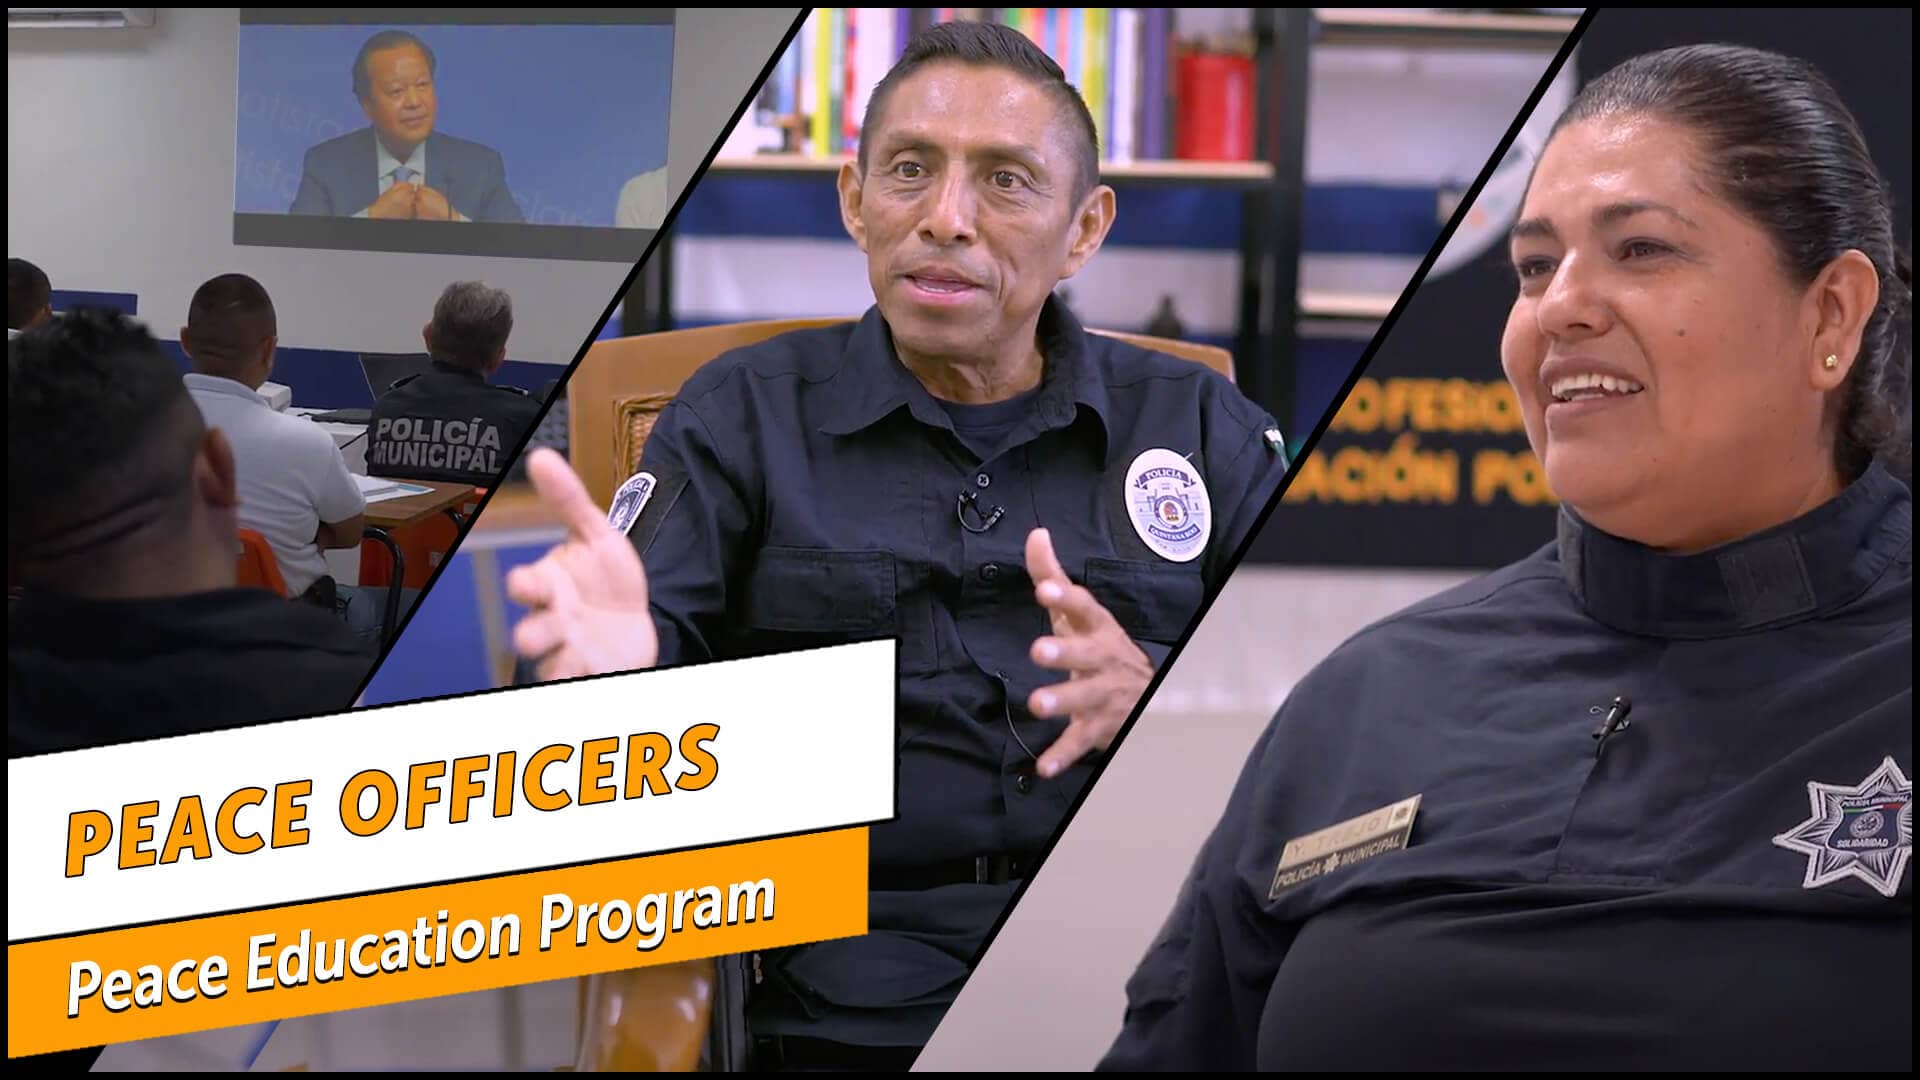 Police in Mexico share their perspectives on the Peace Education Program.